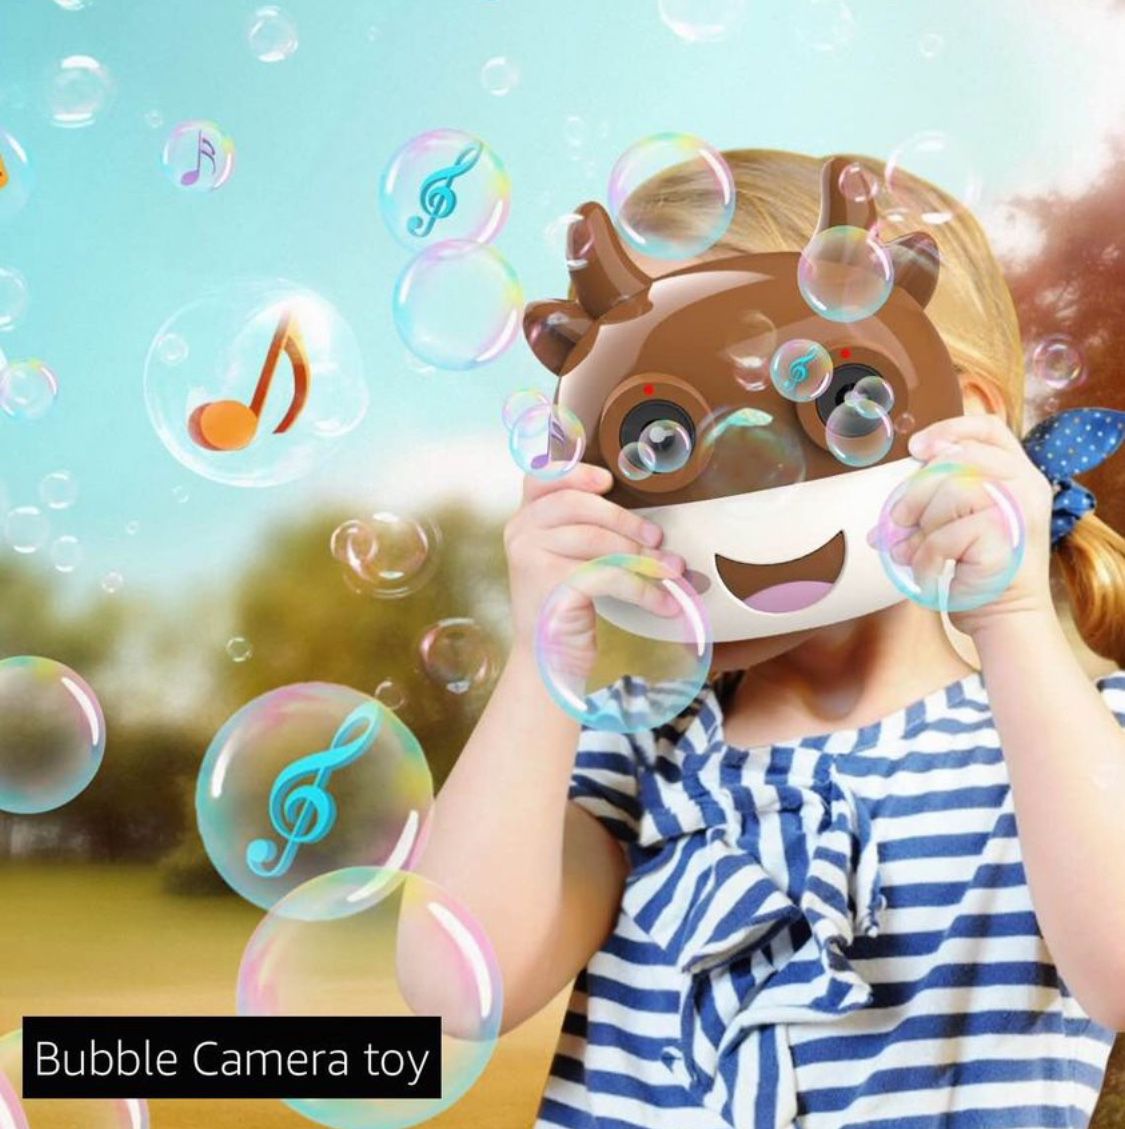 Rechargeable Bubble Machine for Kids, Monkey Automatic Bubble Camera Blower Toy with Light and Music for Parties, Weddings, Outdoor, 800+ Bubbles Per 